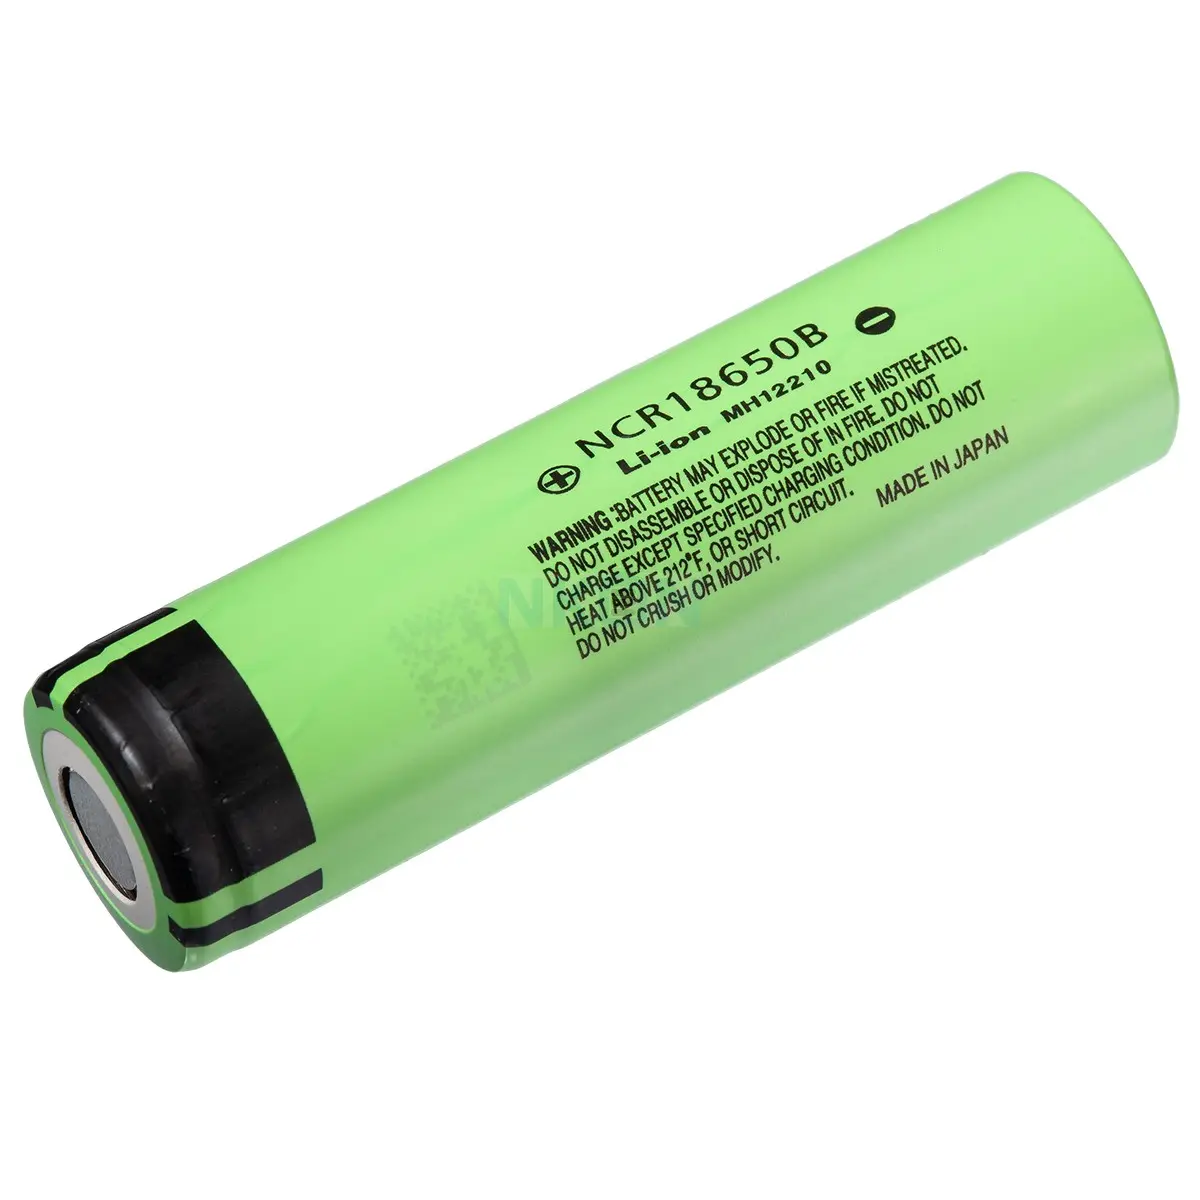 Wholesale 100% Original NCR18650B li-ion Battery flat top made in Japan 3.7V 3400mAh Rechargeable Battery Pack